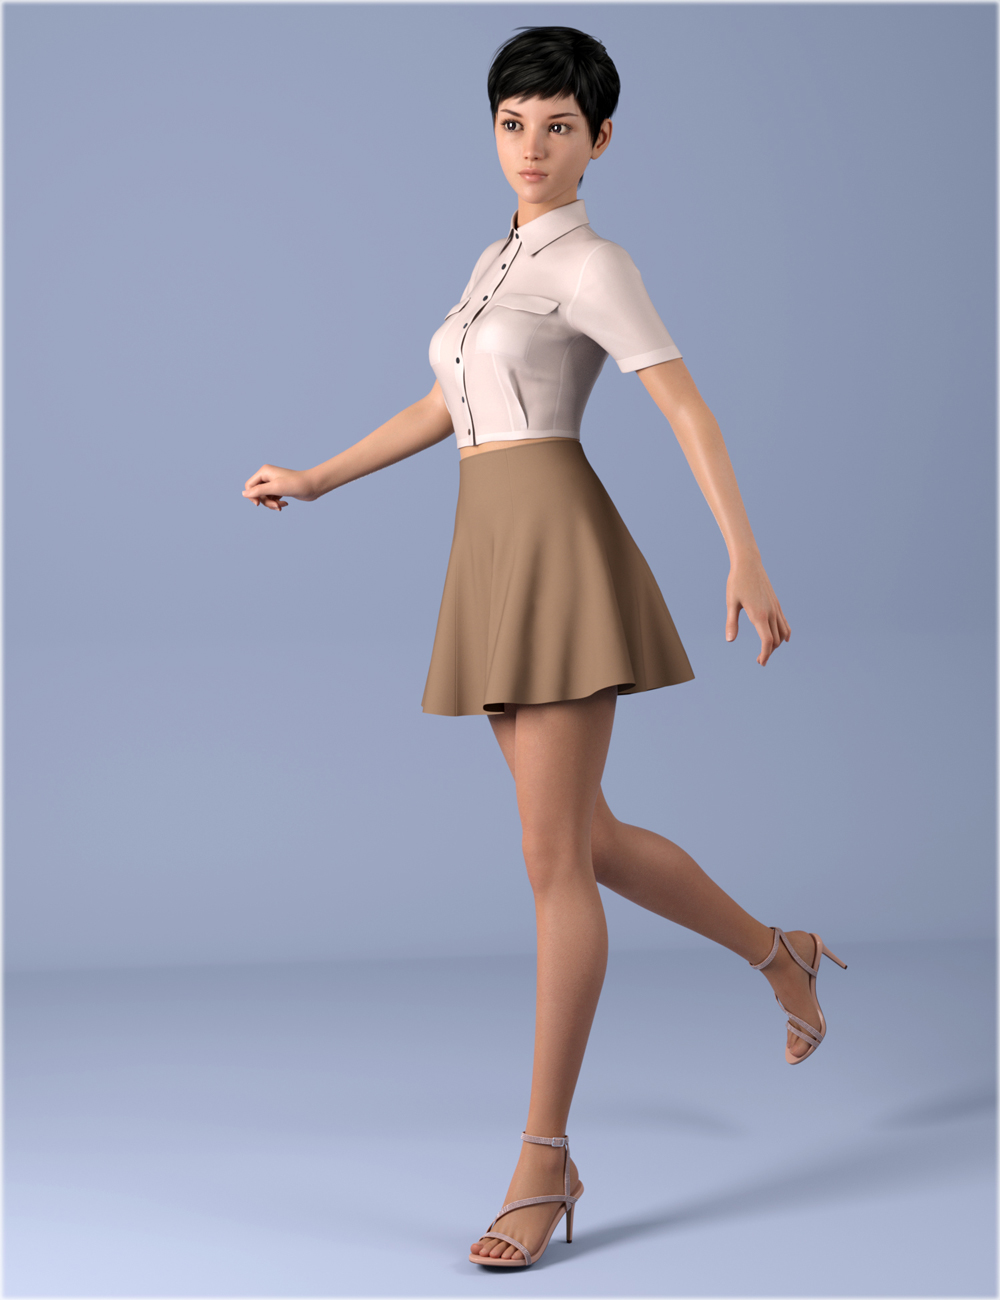 dForce HnC Cropped Shirt Outfits for Genesis 8.1 Females by: IH Kang, 3D Models by Daz 3D